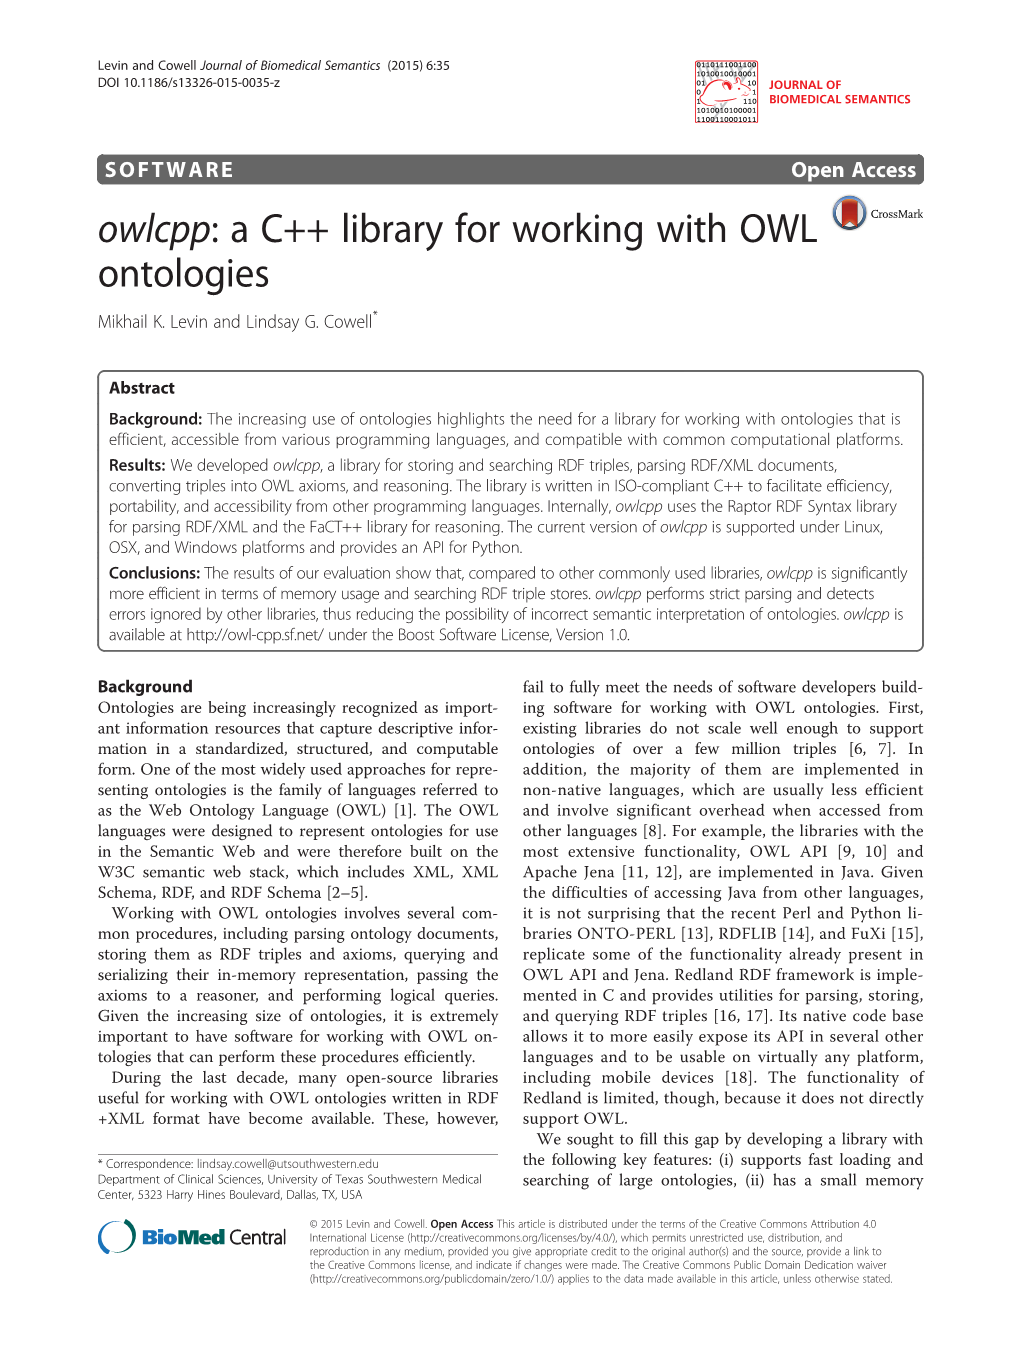 Owlcpp: a C++ Library for Working with OWL Ontologies Mikhail K